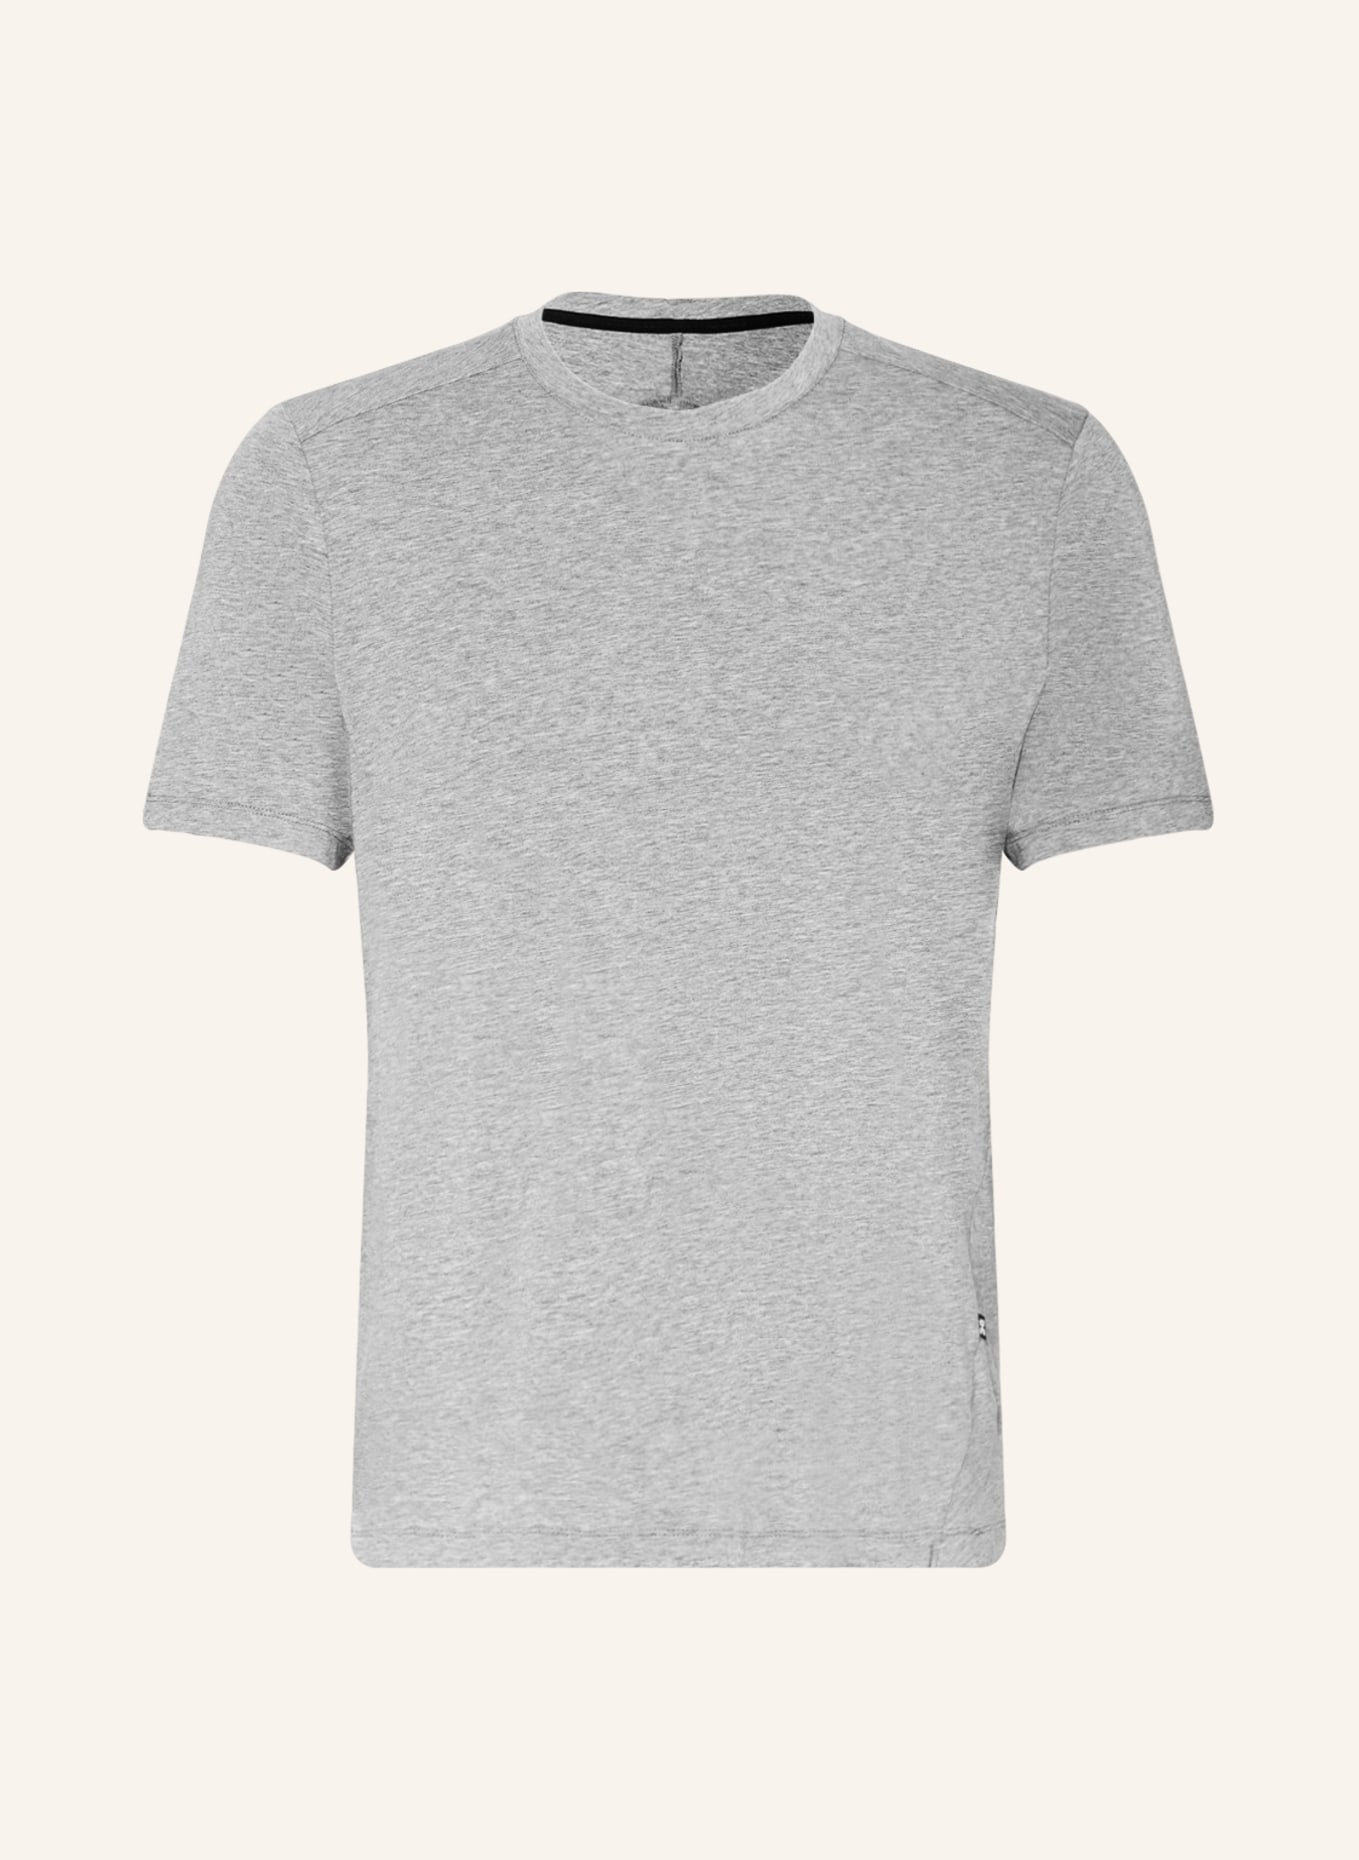 On T-shirt ACTIVE-T, Color: GRAY (Image 1)